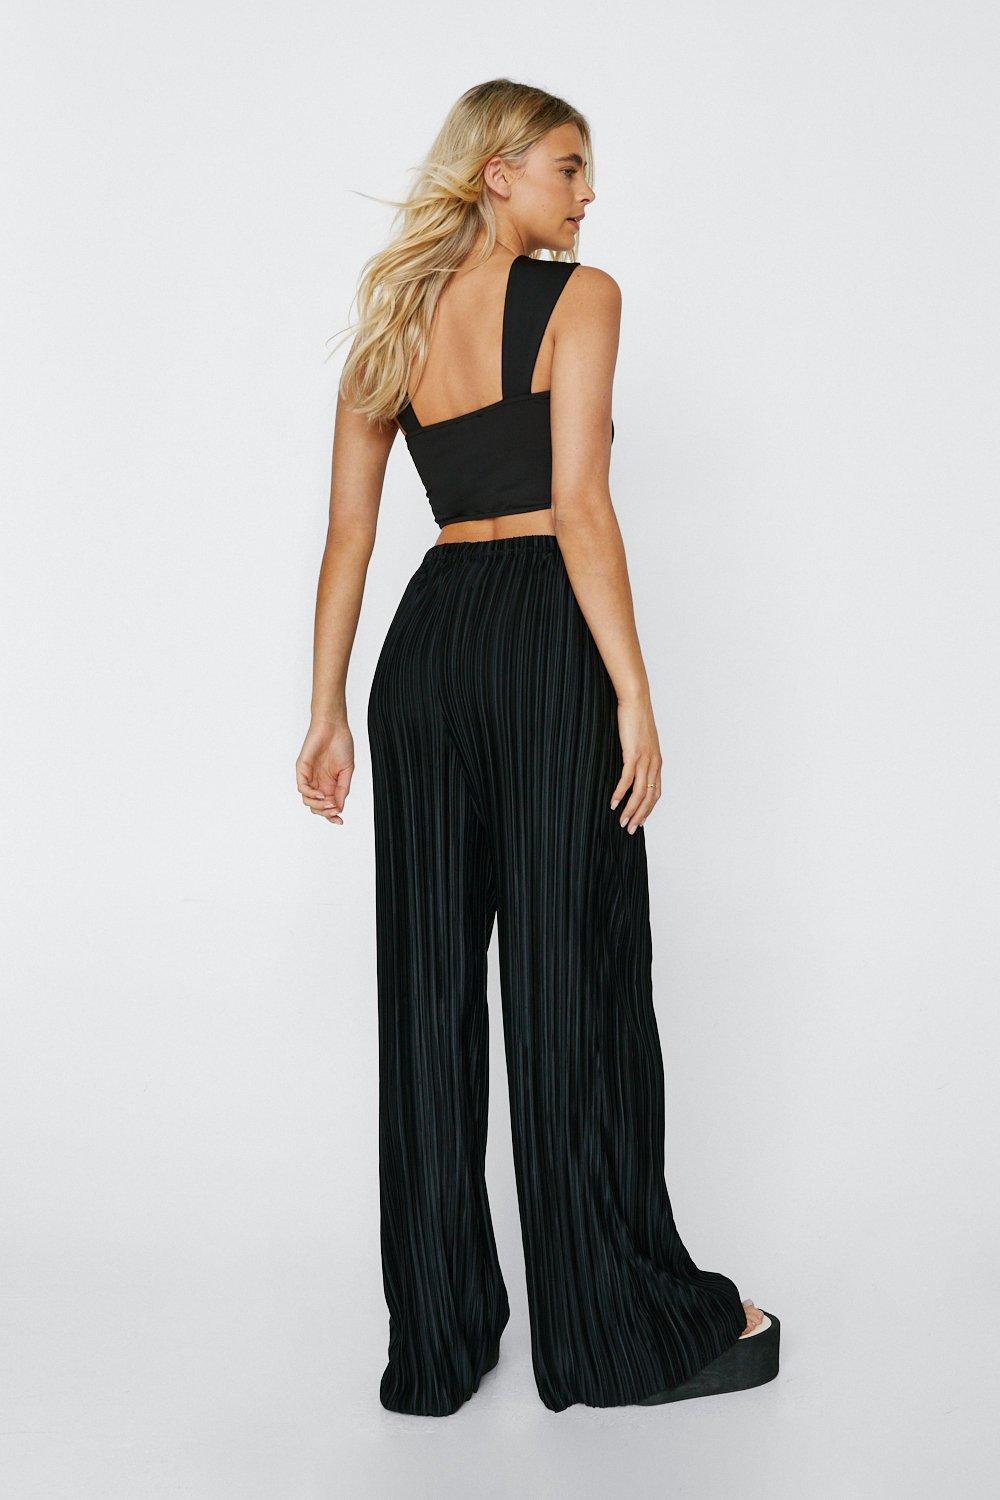 Nasty Gal Womens Petite Plisse High Waisted Flare Pants - ShopStyle